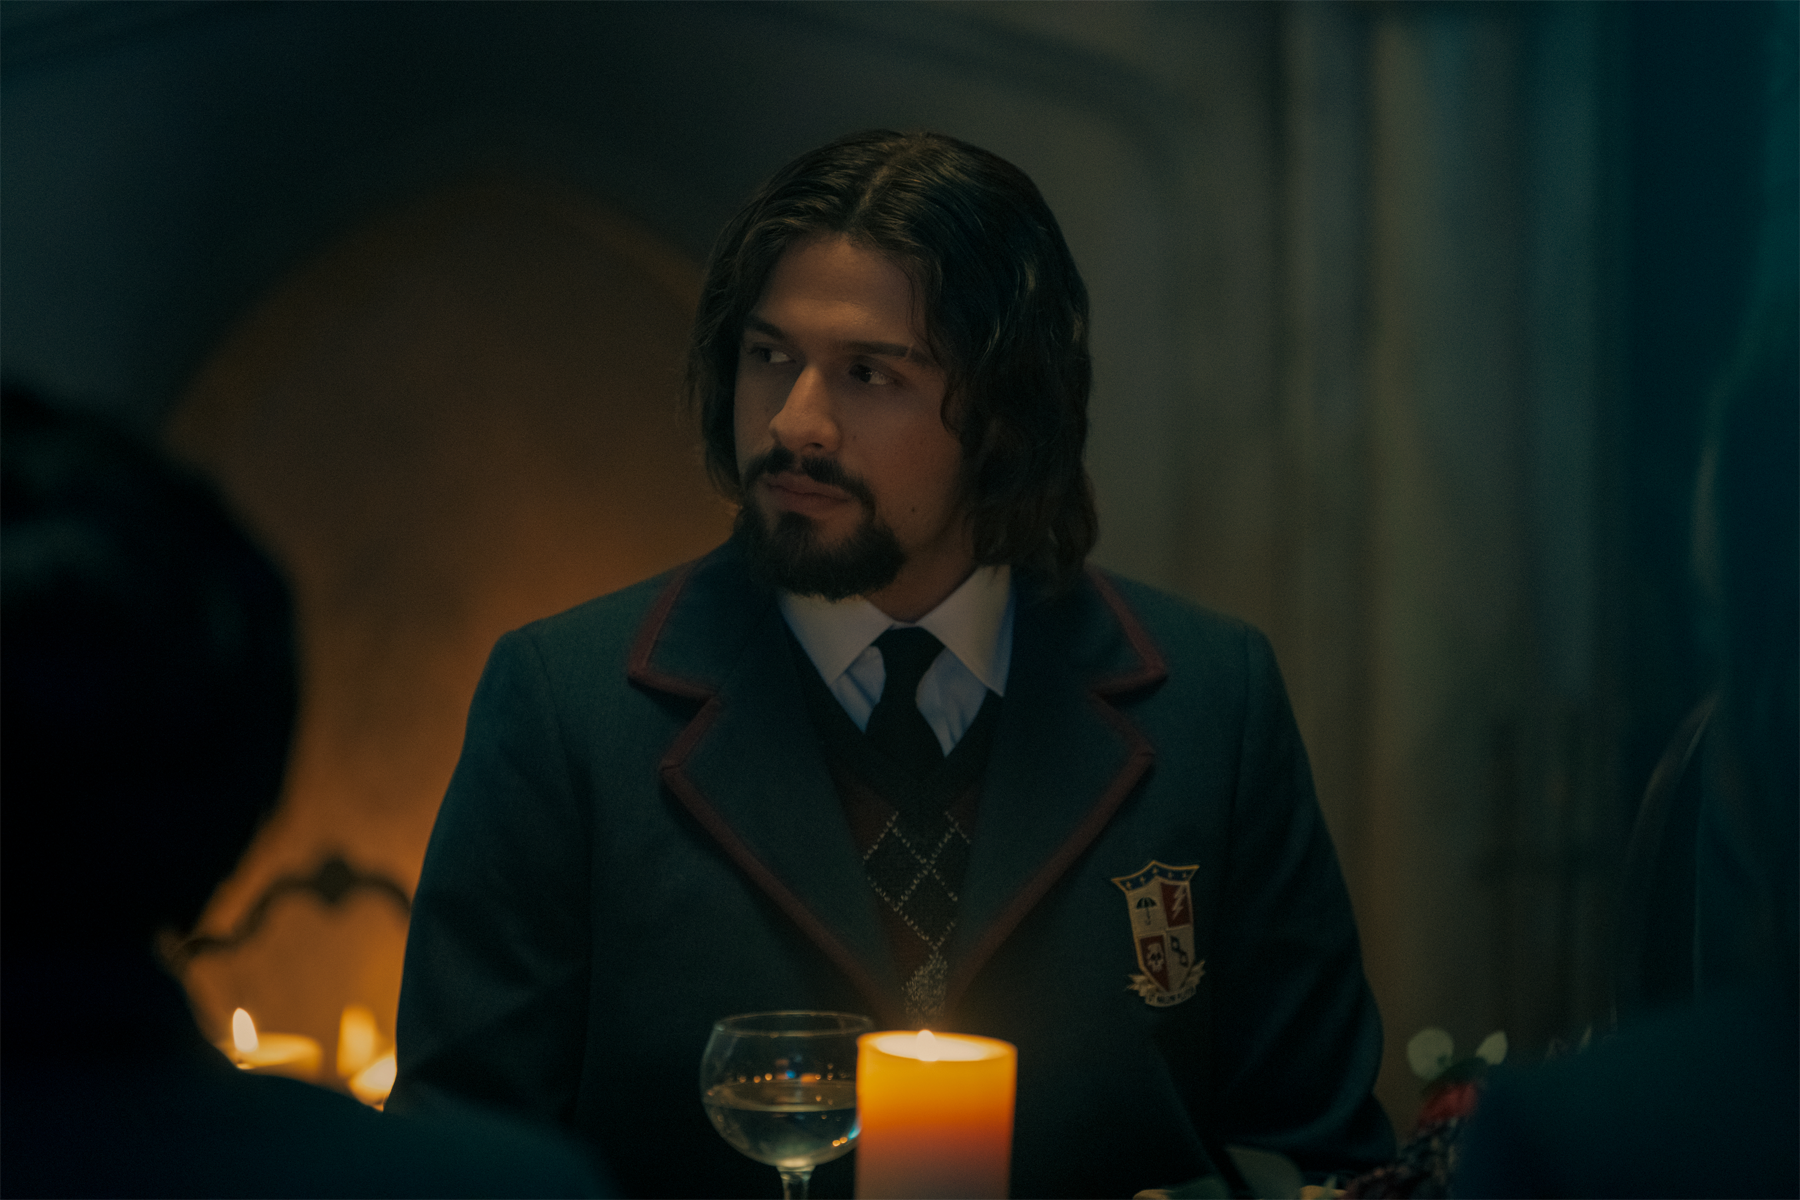 In Our First Look at Umbrella Academy Season 2, Long Hair and Swedish Assassins Abound